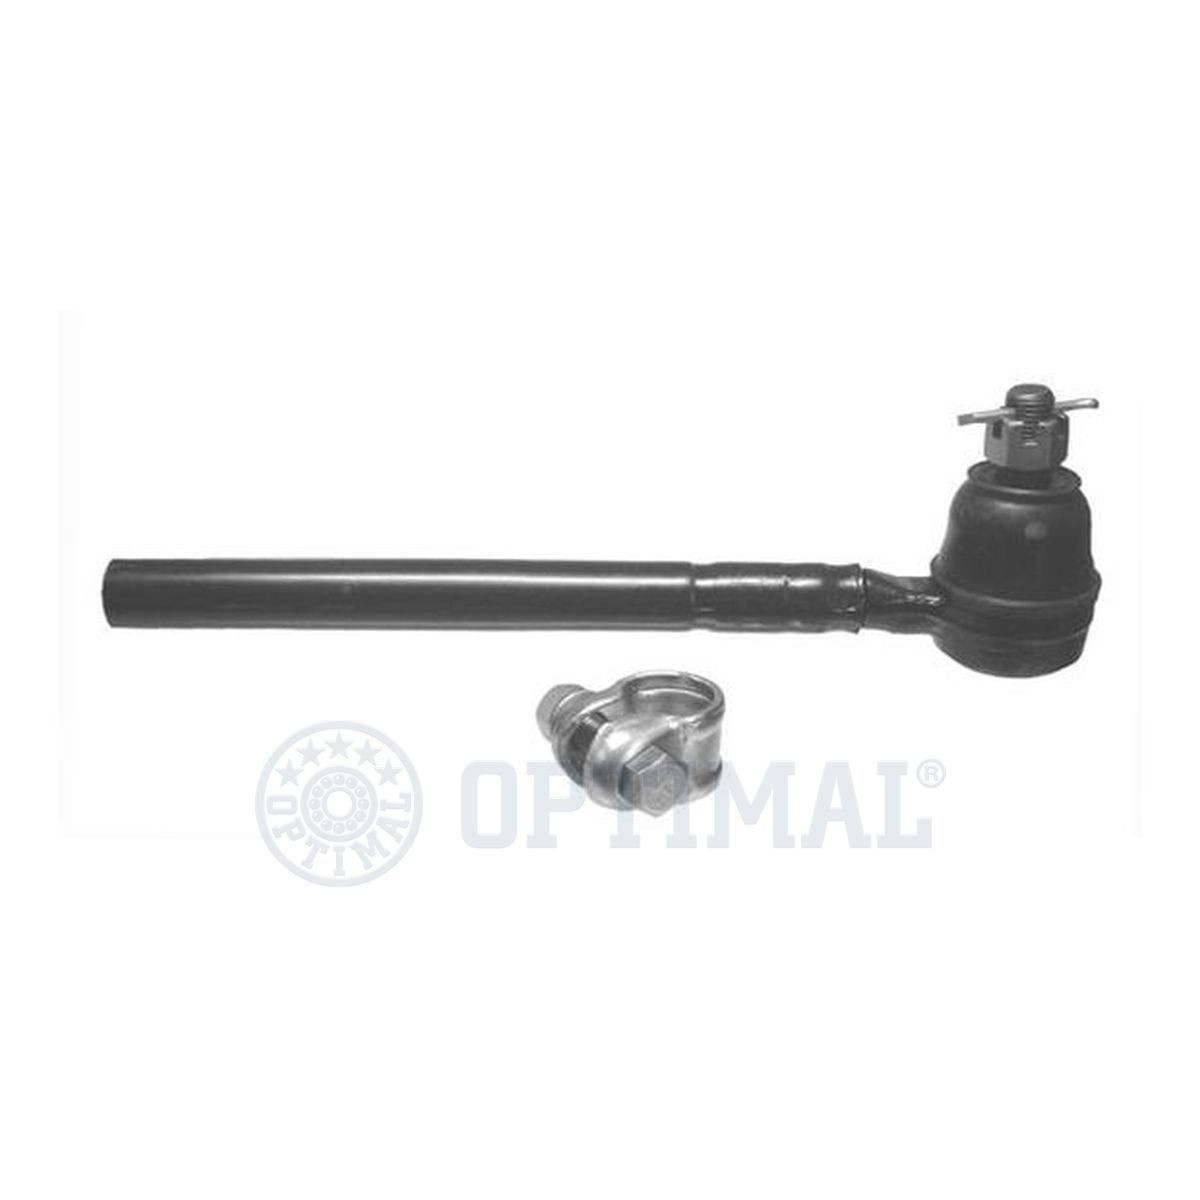 OPTIMAL G1-634 Track rod end Cone Size 12,8 mm, Front Axle